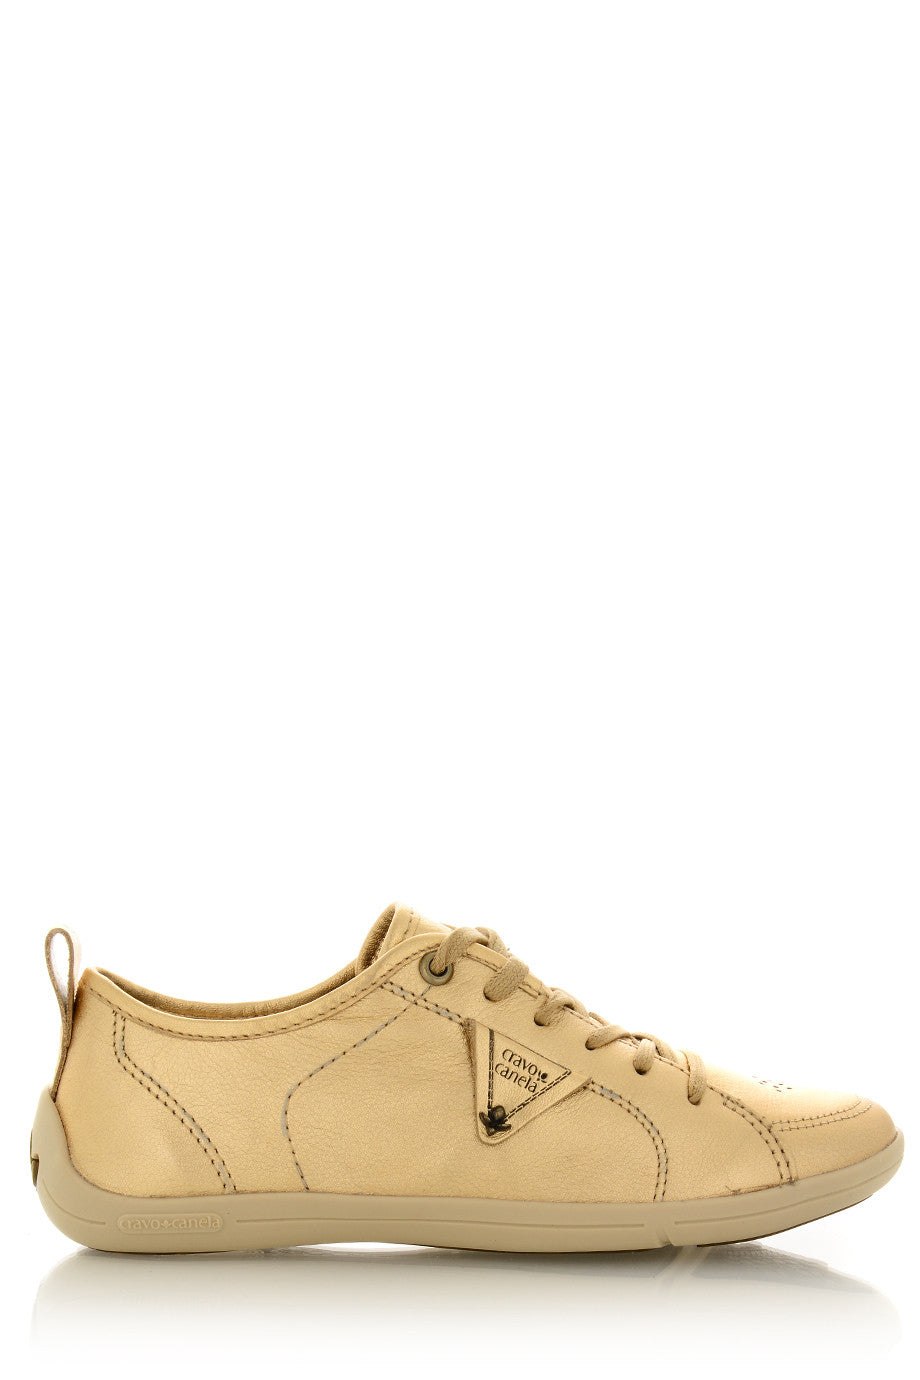 CRAVO & CANELA LOLLY Bronze Gold Leather Sneakers – PRET-A-BEAUTE